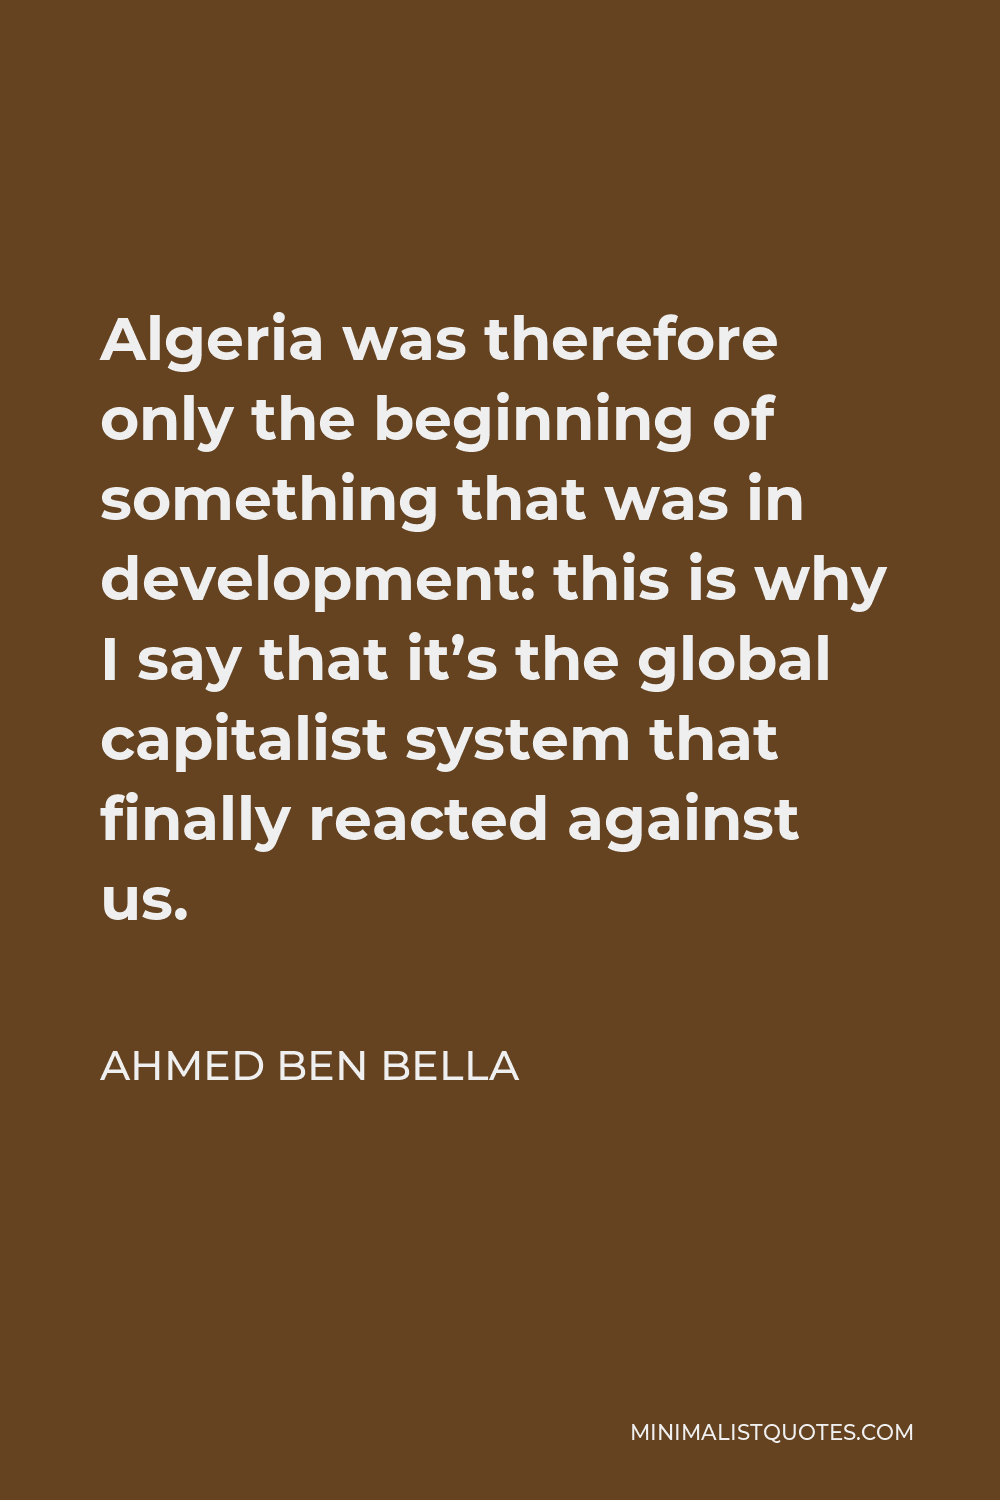 Ahmed Ben Bella Quote - Algeria was therefore only the beginning of something that was in development: this is why I say that it’s the global capitalist system that finally reacted against us.